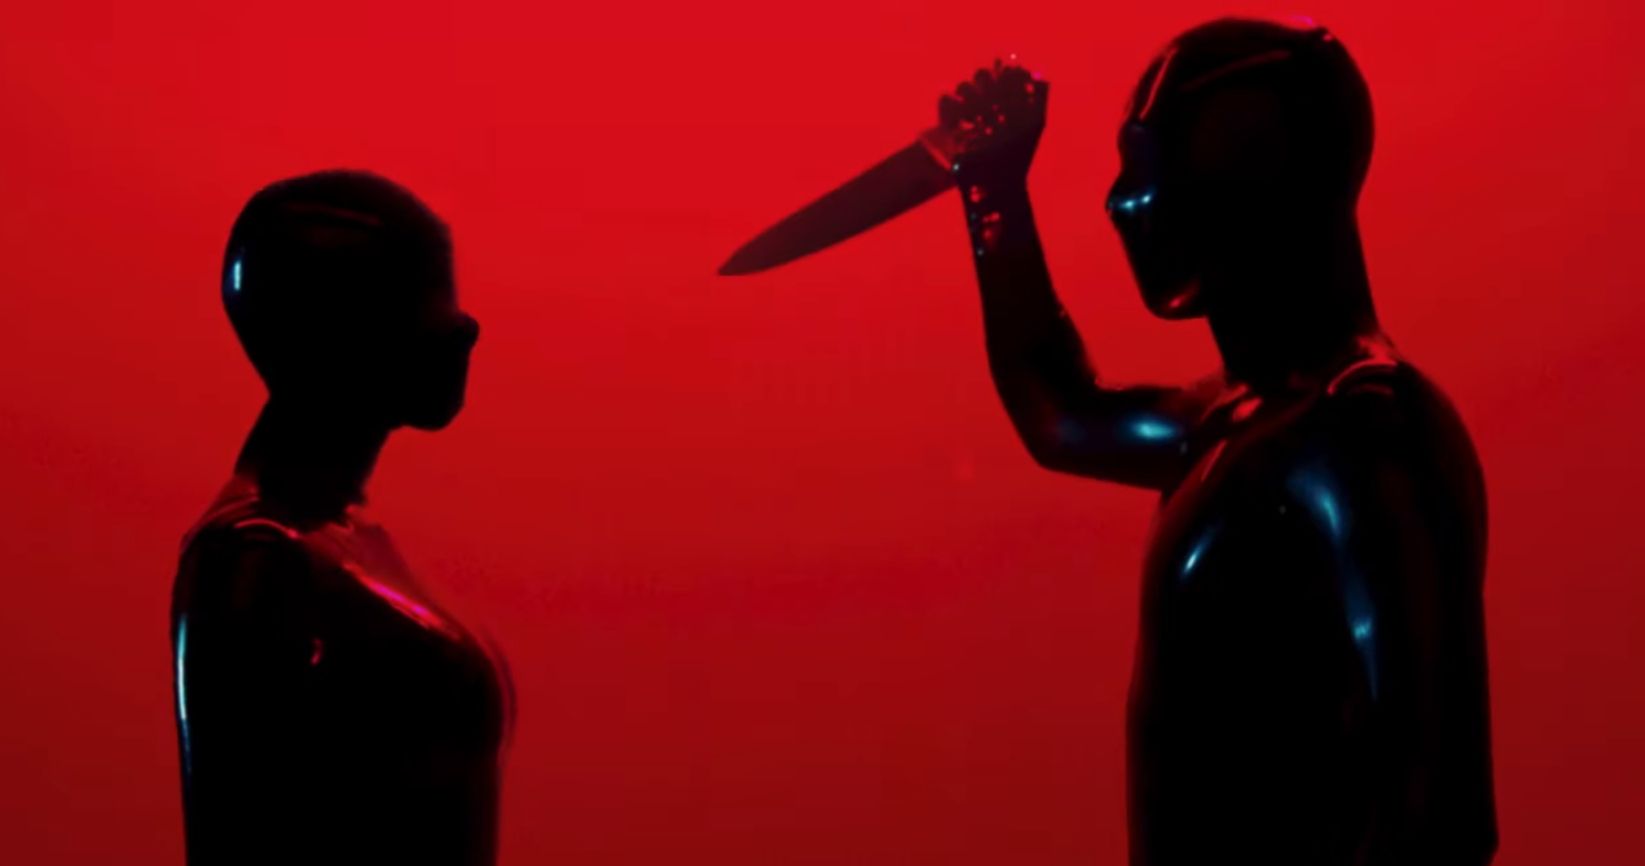 The Rubber Woman Arrives in American Horror Stories as We Head Back to Murder House